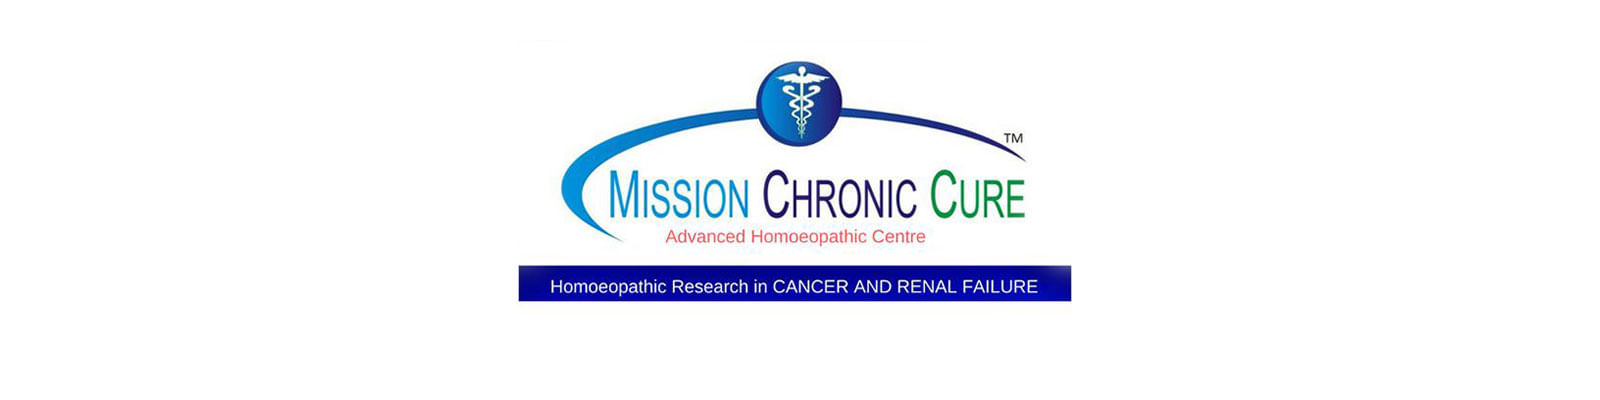 Mission Chronic Cure